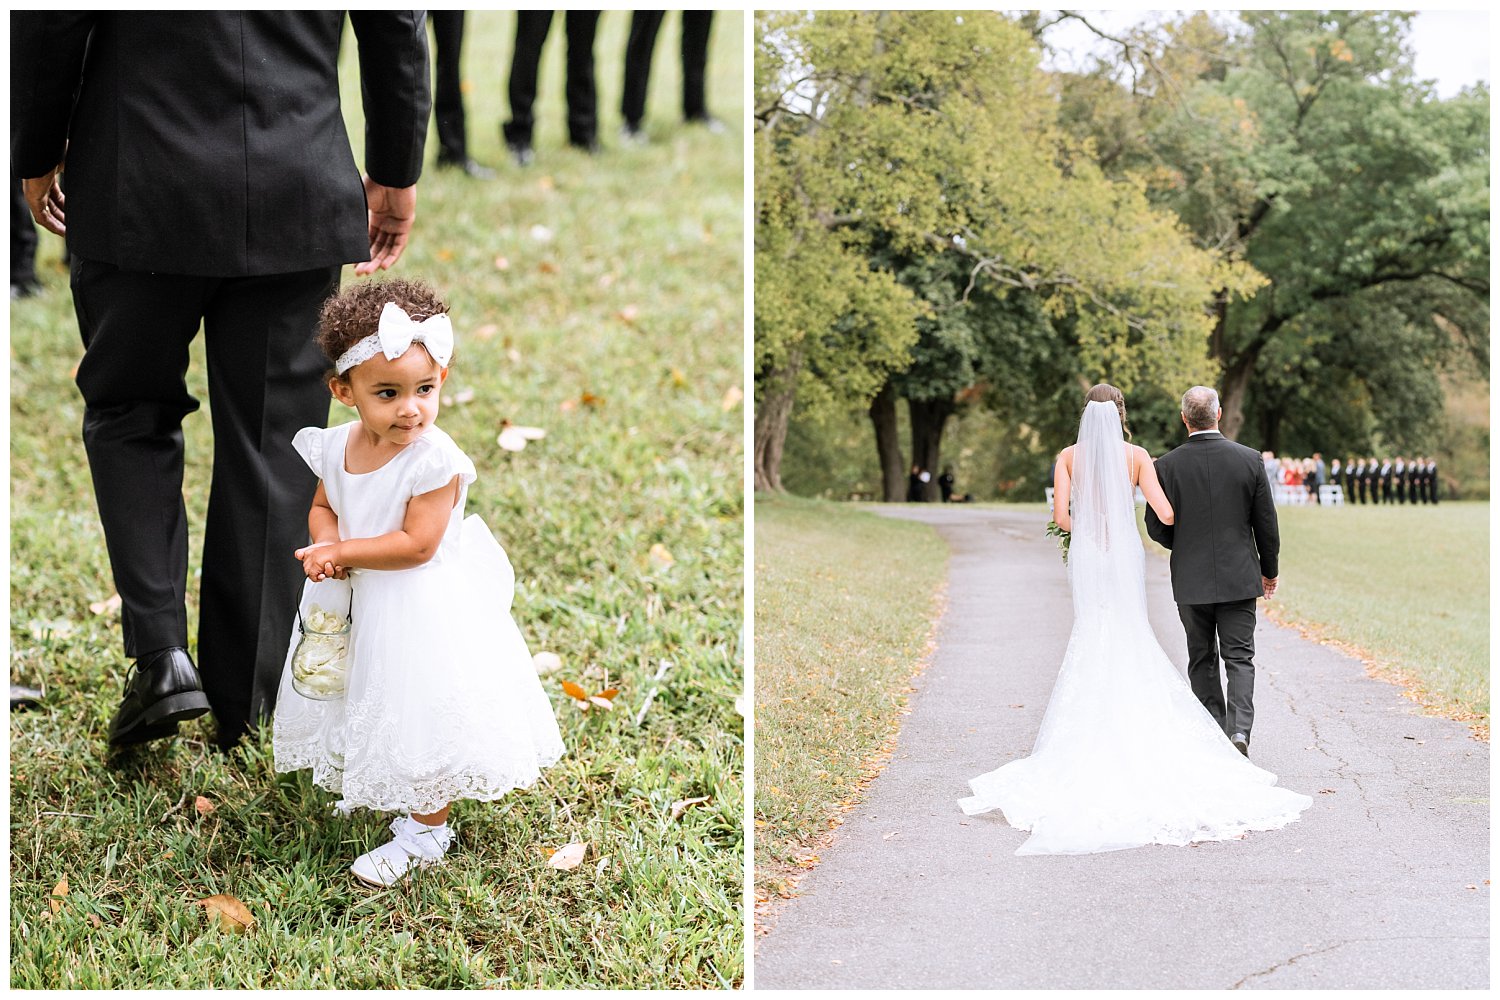 Flower girl and bride walking down the aisle at Westover & Maymont Gardens wedding